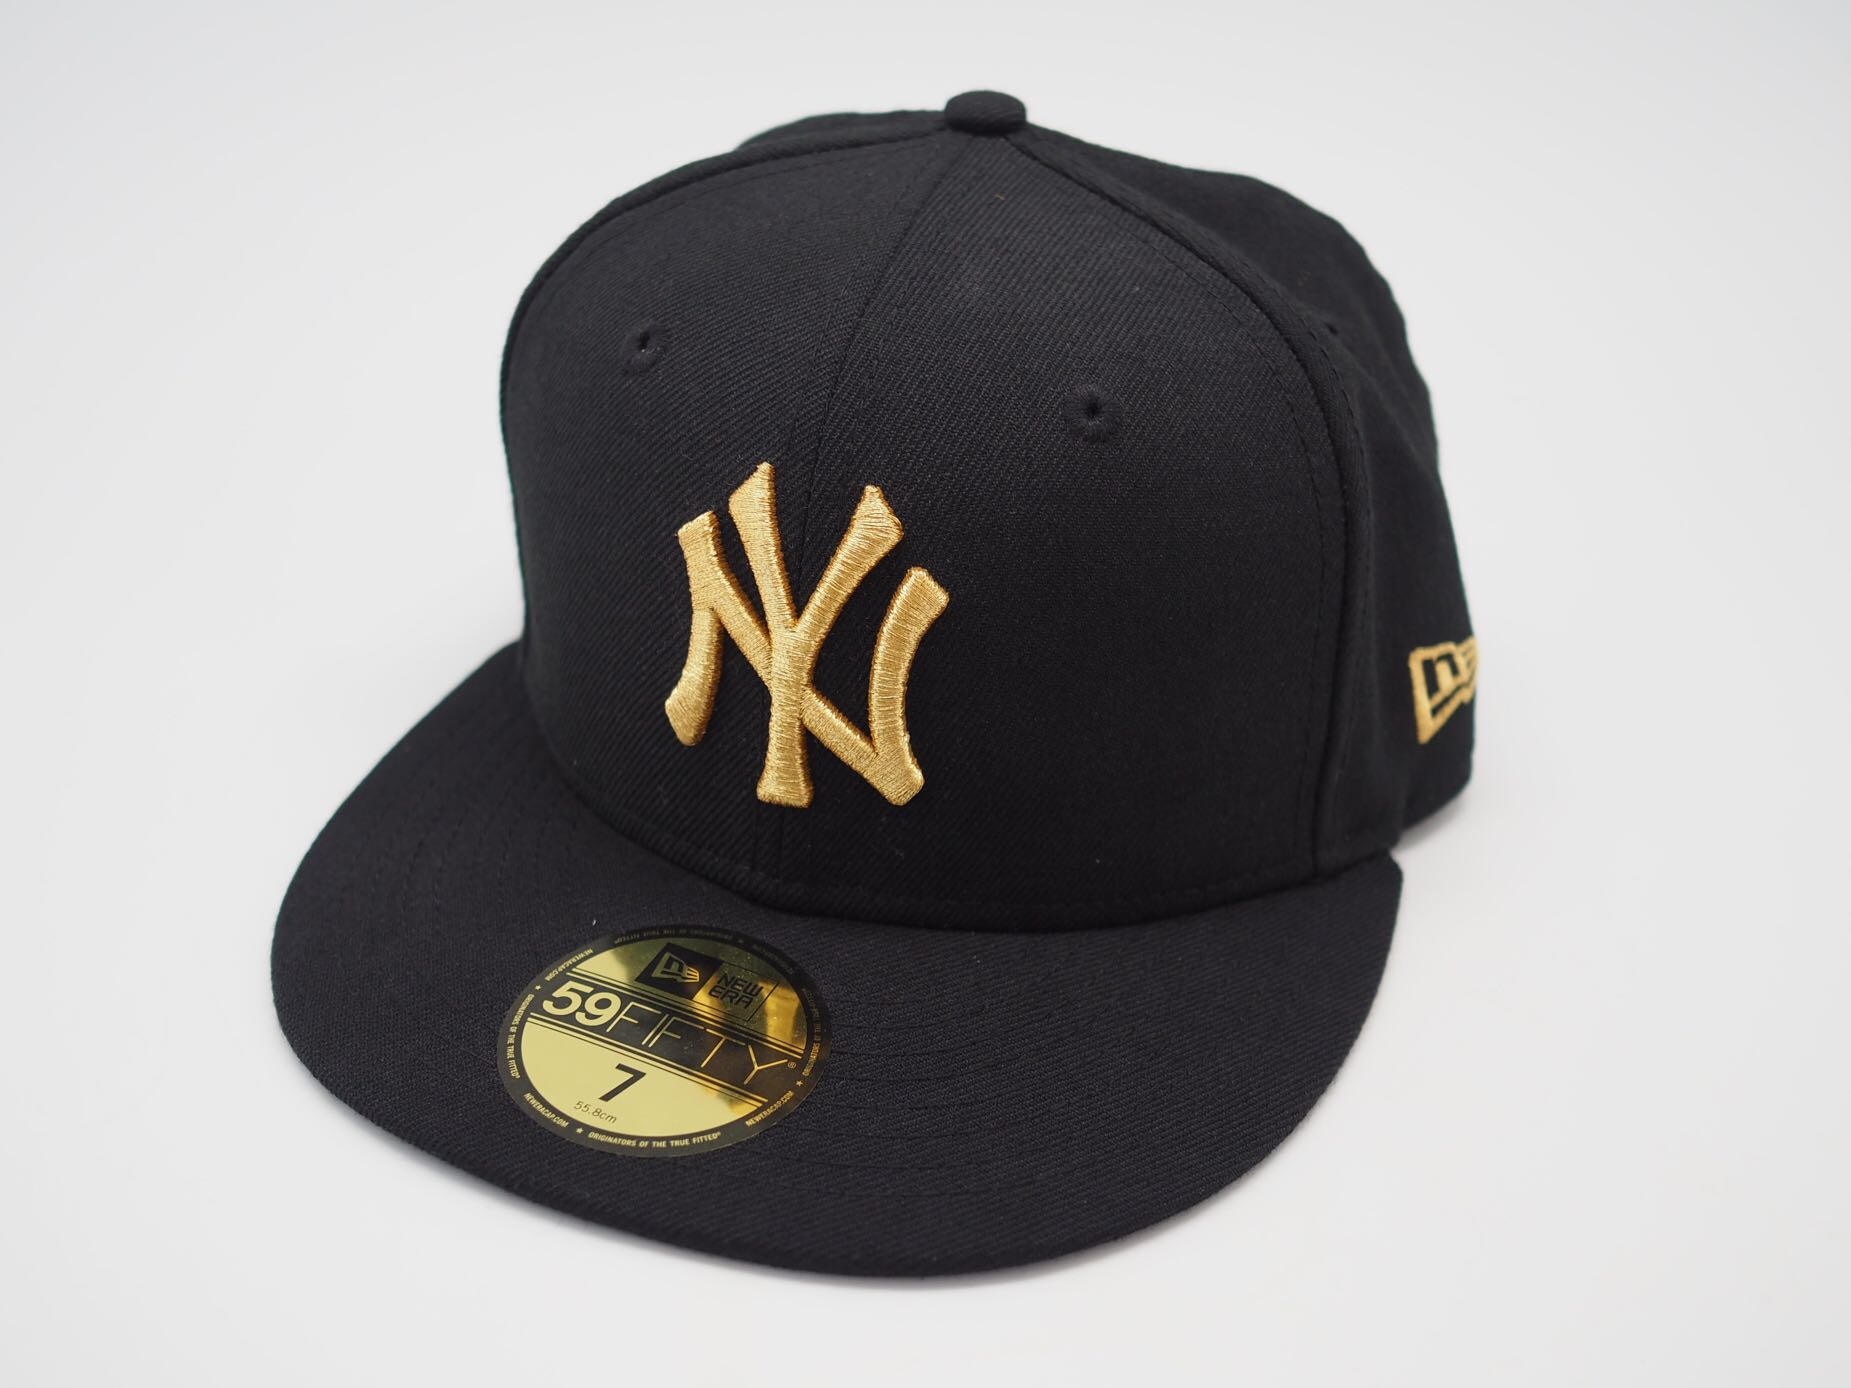 MLB Original New York Yankees Baseball Cap BlackGold Size LXXL Mens  Fashion Watches  Accessories Caps  Hats on Carousell